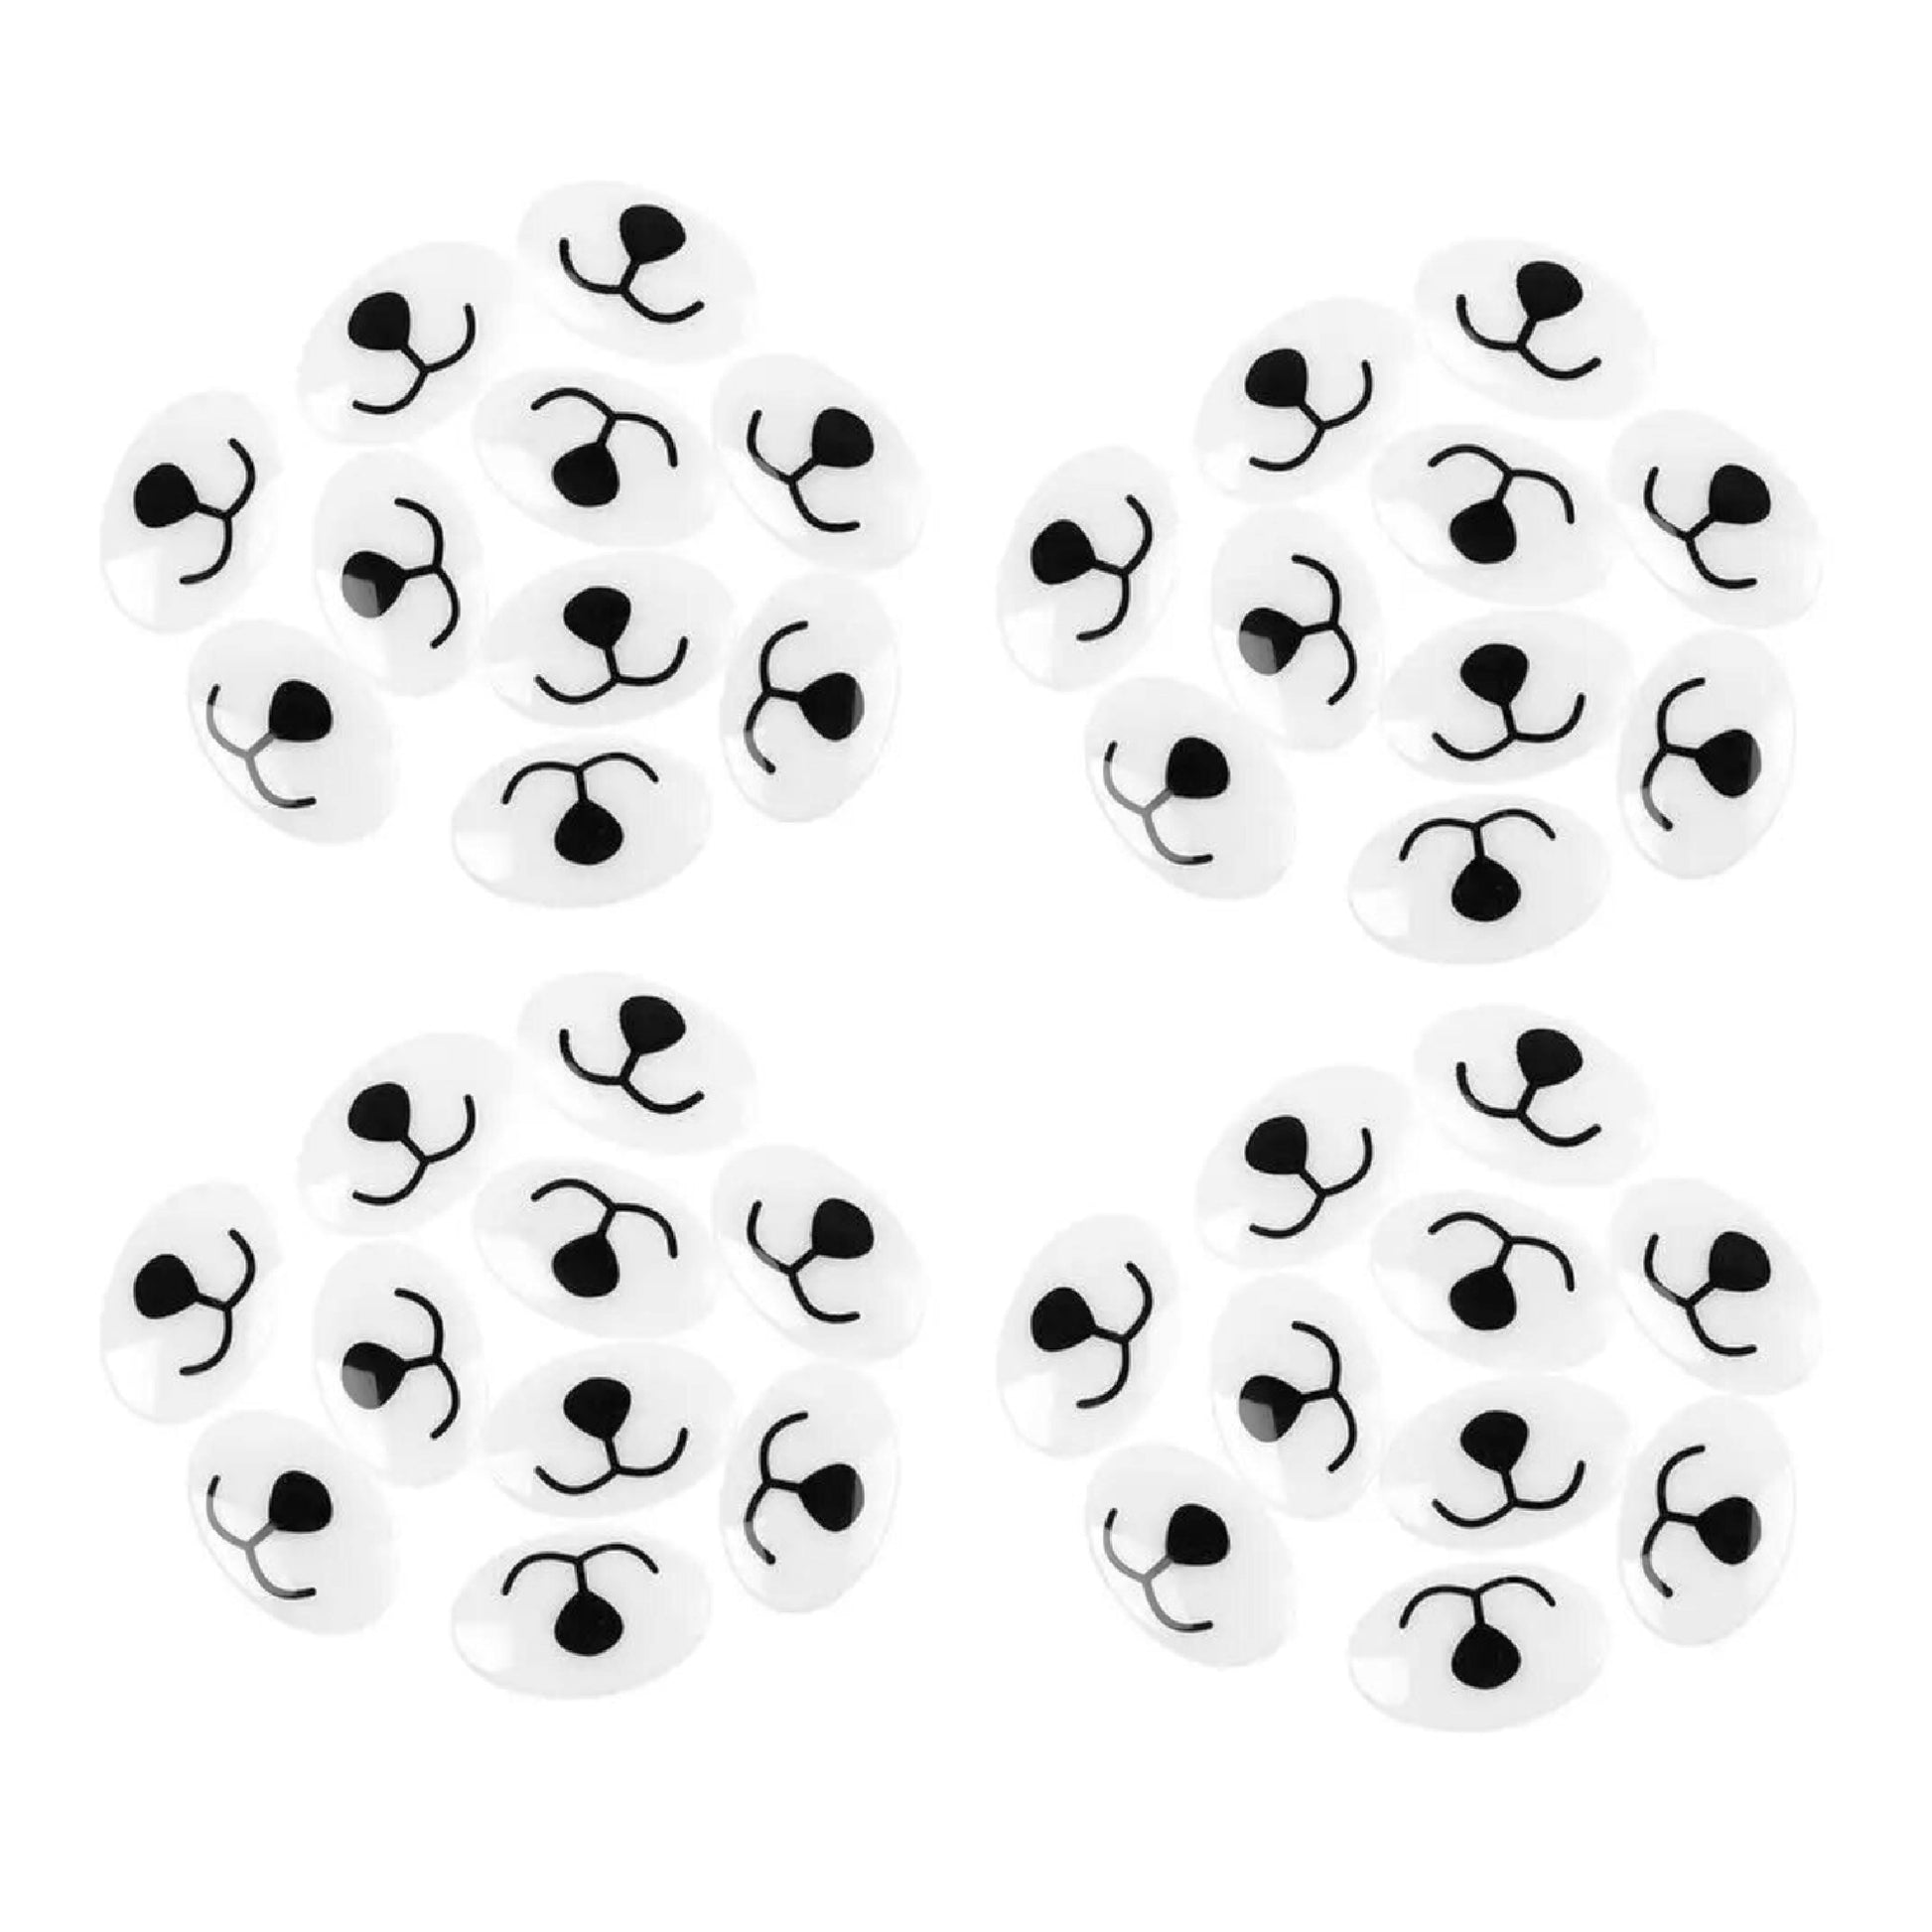 39pcs 27mm Plastic Safety Dog Noses Teddy Noses for Scrapbooking Card Making White Oval Shape